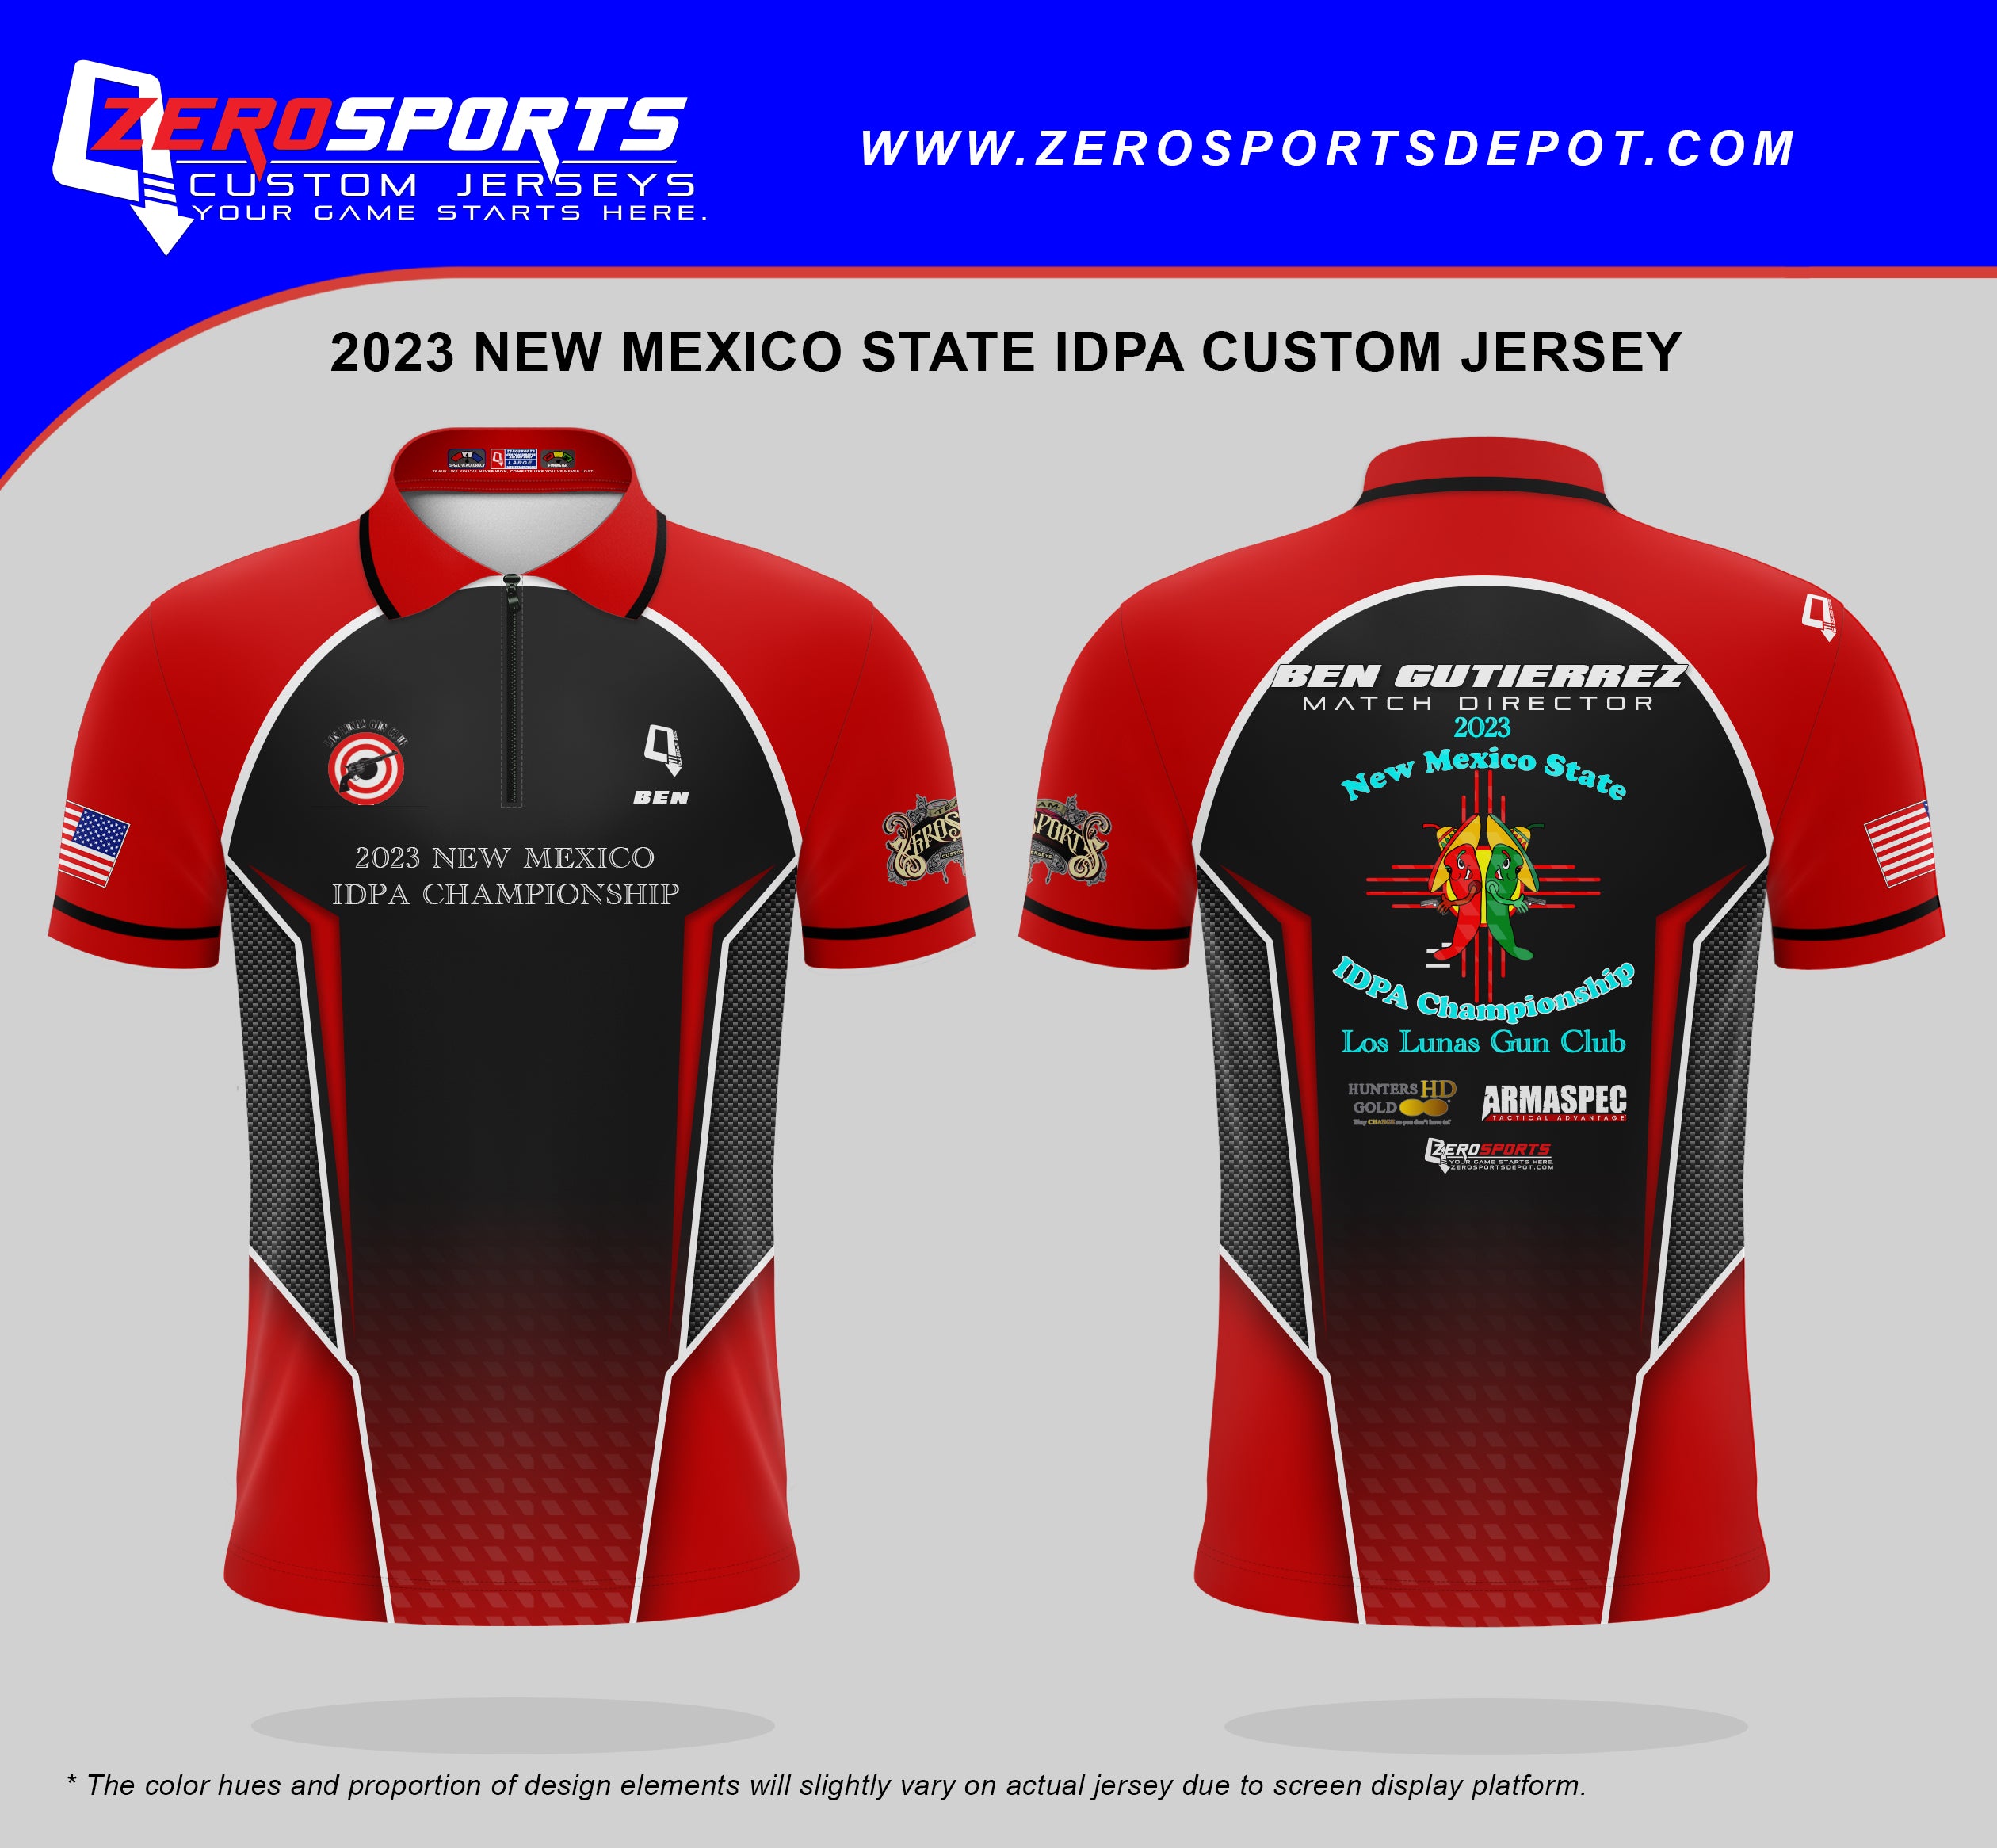 2023 New Mexico State Championship Match Jersey  **All orders after 7/31/2023 will be shipped directly to your address after the match.